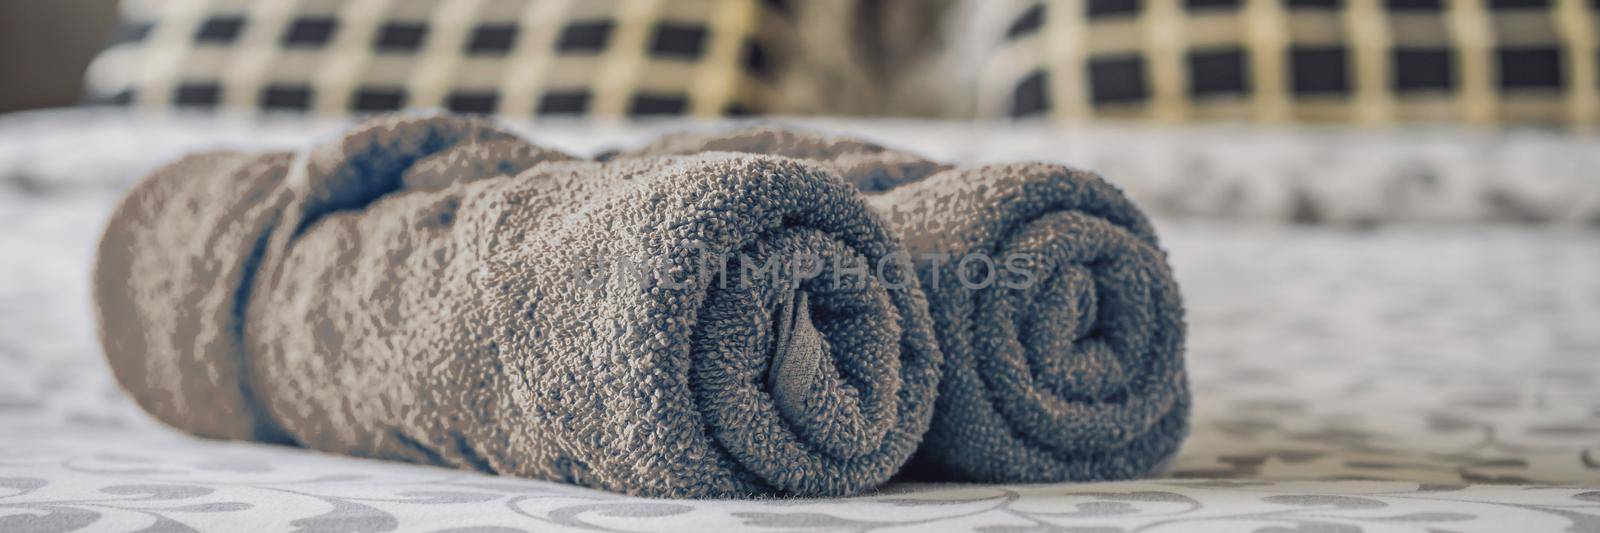 Freshly laundered fluffy towels on bed in hotel BANNER, LONG FORMAT by galitskaya